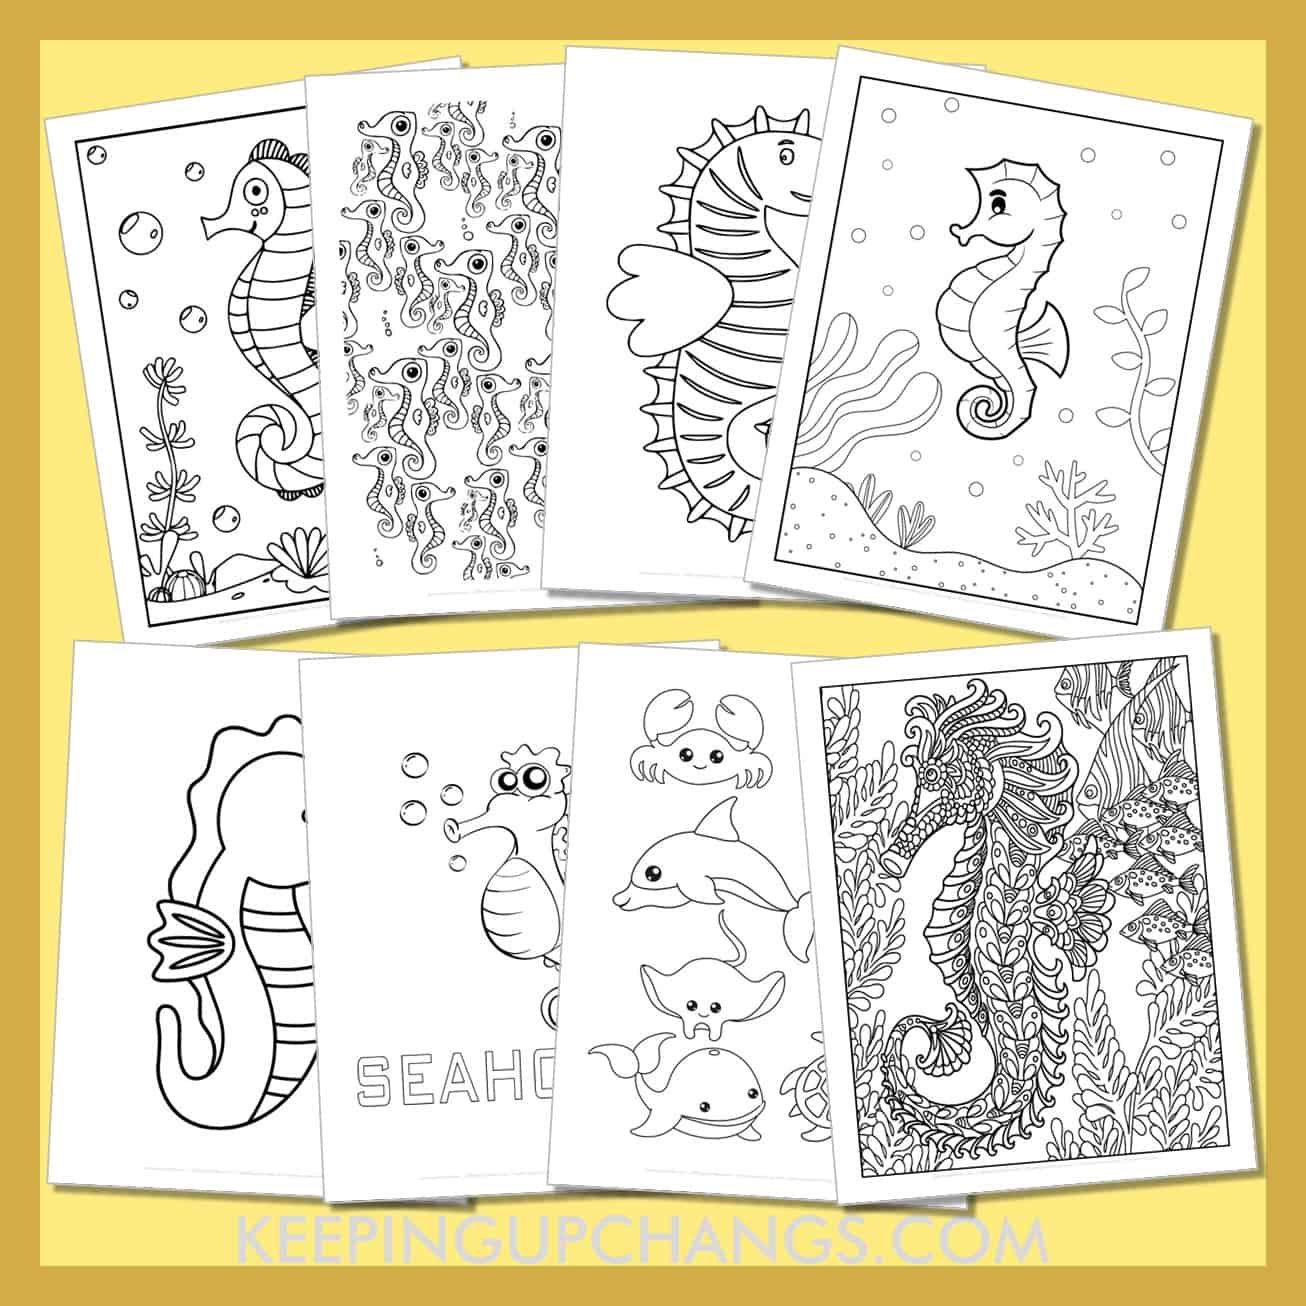 free seahorse to color for toddlers, kids, adults.